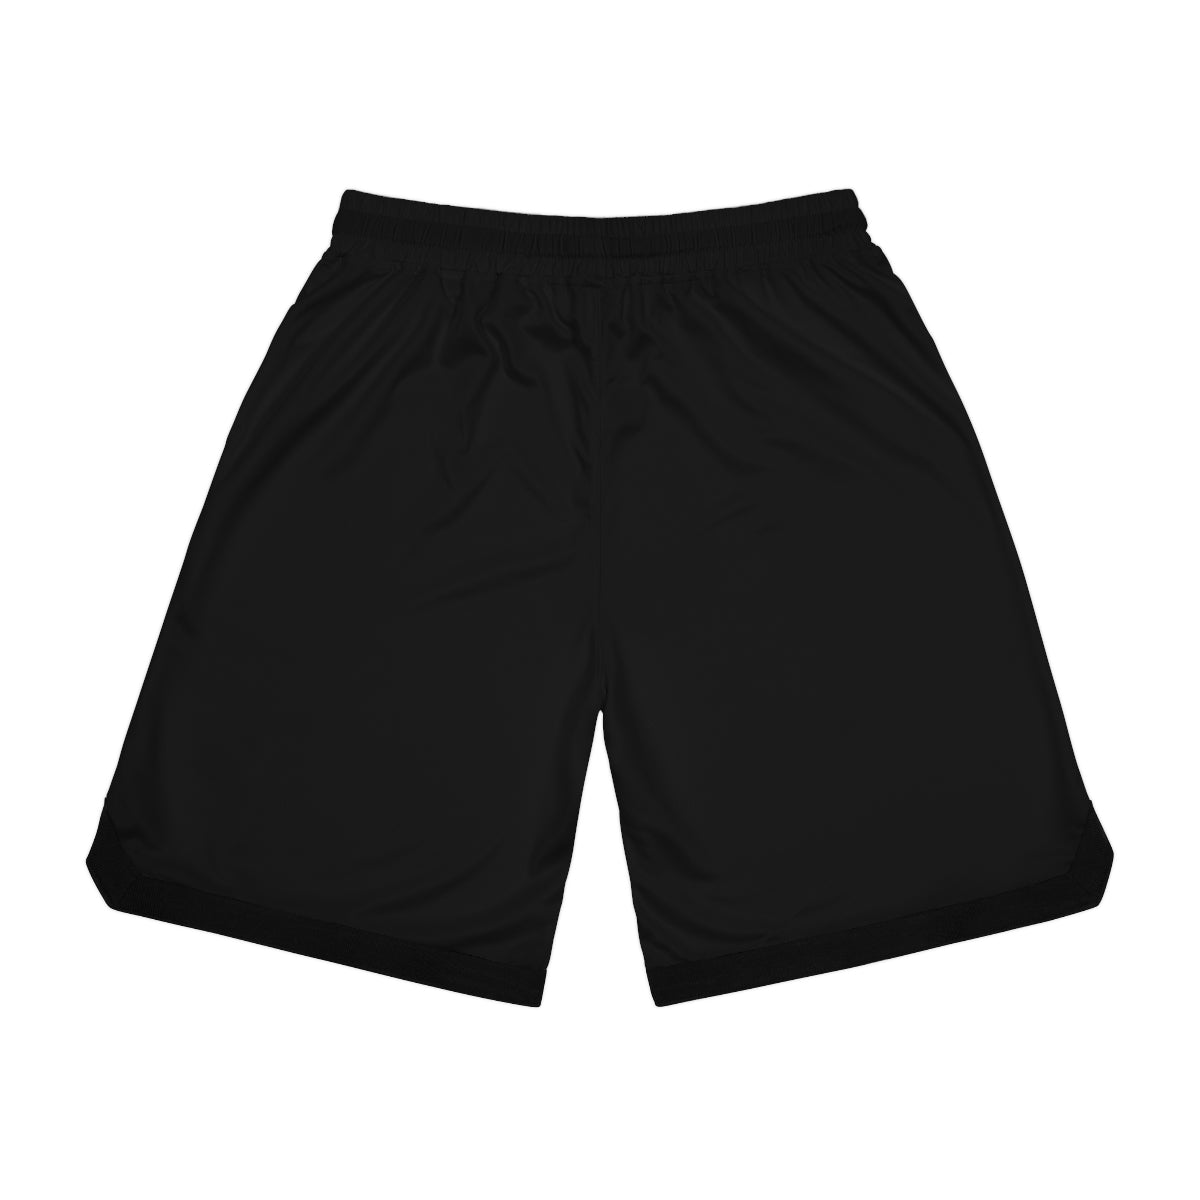 theDopeOnes Finals Shorts